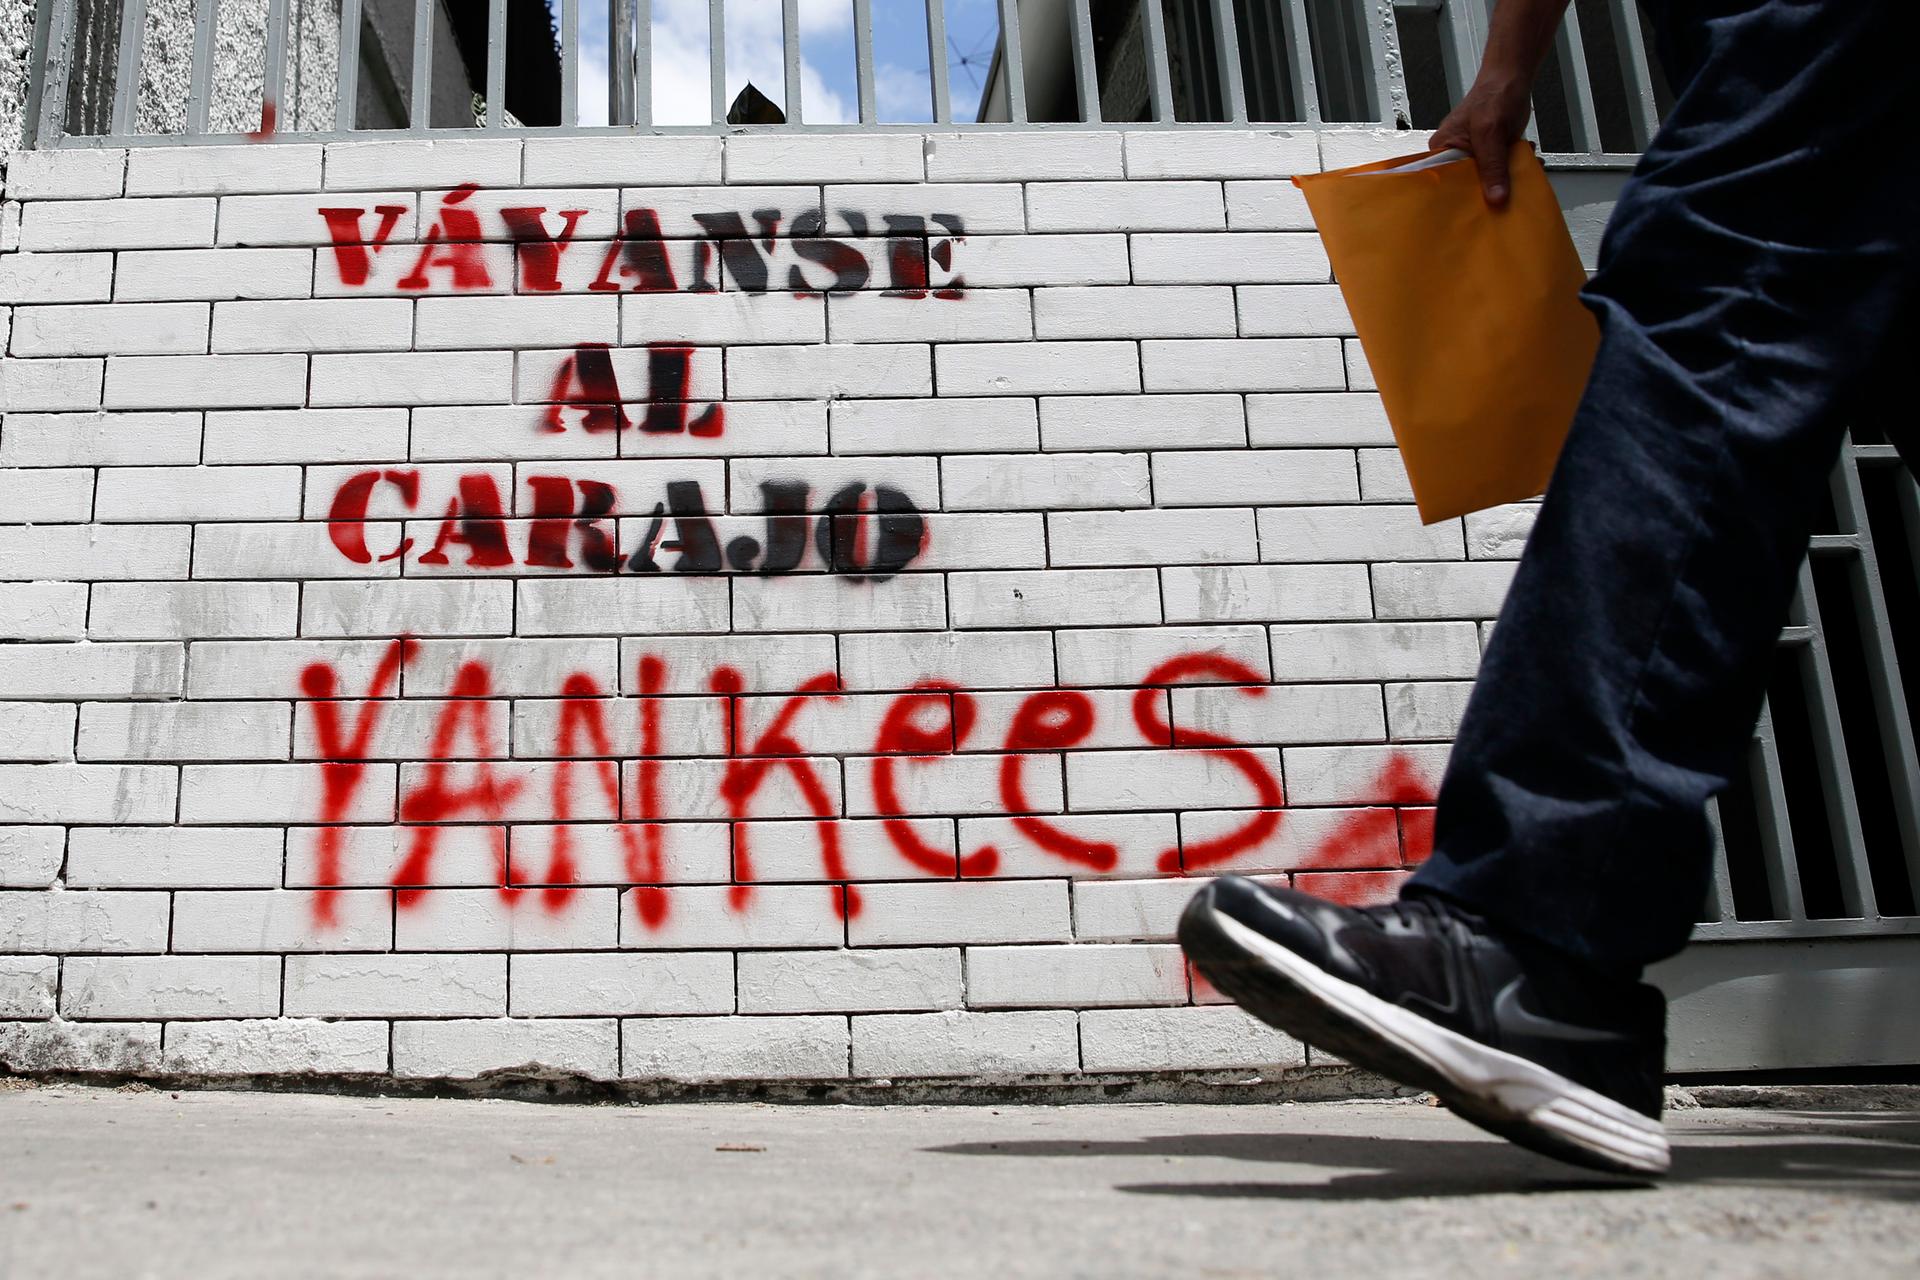 A man walks past graffiti which reads "Yankees, go to hell" in Caracas March 10, 2015. President Nicolas Maduro was seeking special decree powers from Venezuela's parliament on Tuesday in response to new US sanctions, drawing opposition protests of a powe